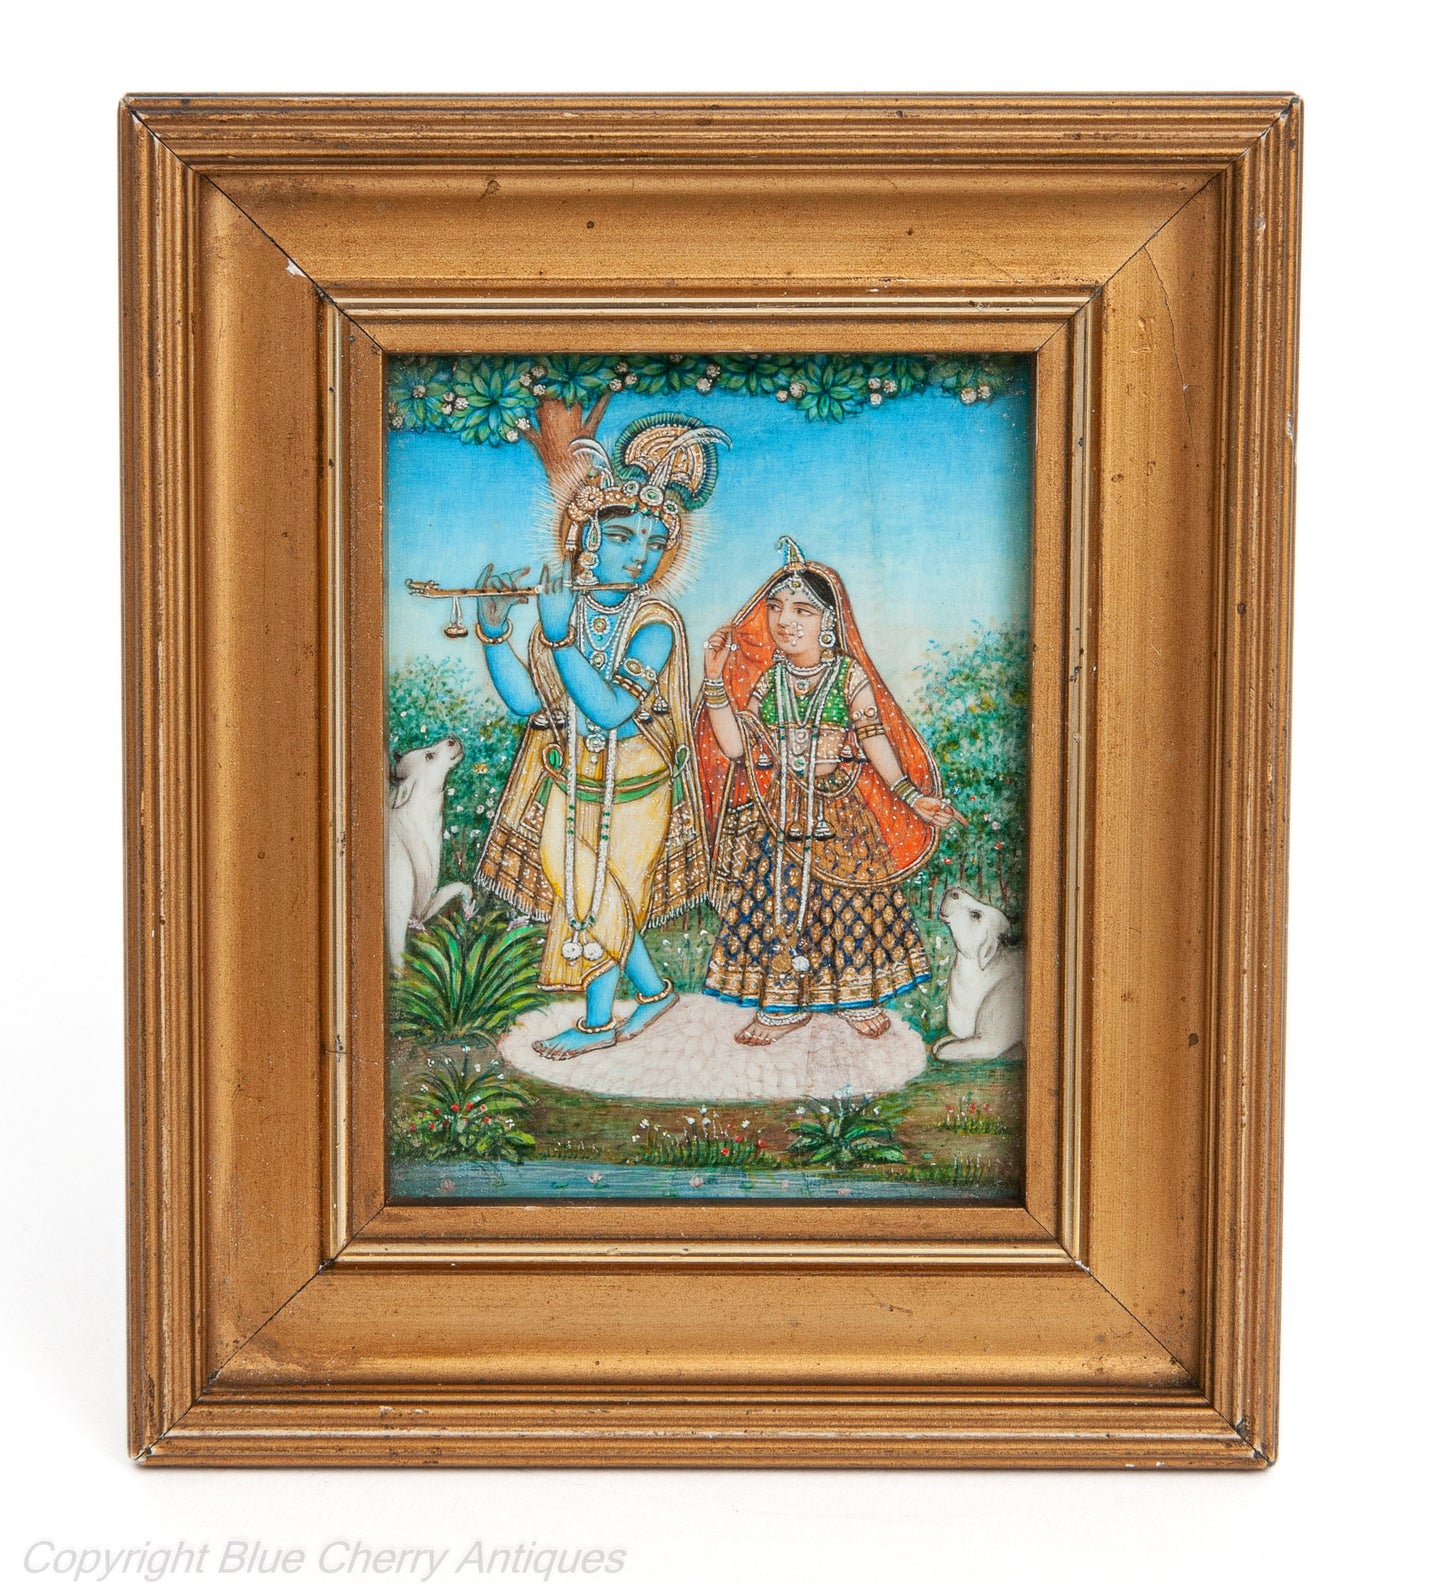 Antique Indian Framed Watercolour Miniature Portrait Painting of Radha Krishna (Code 1917)